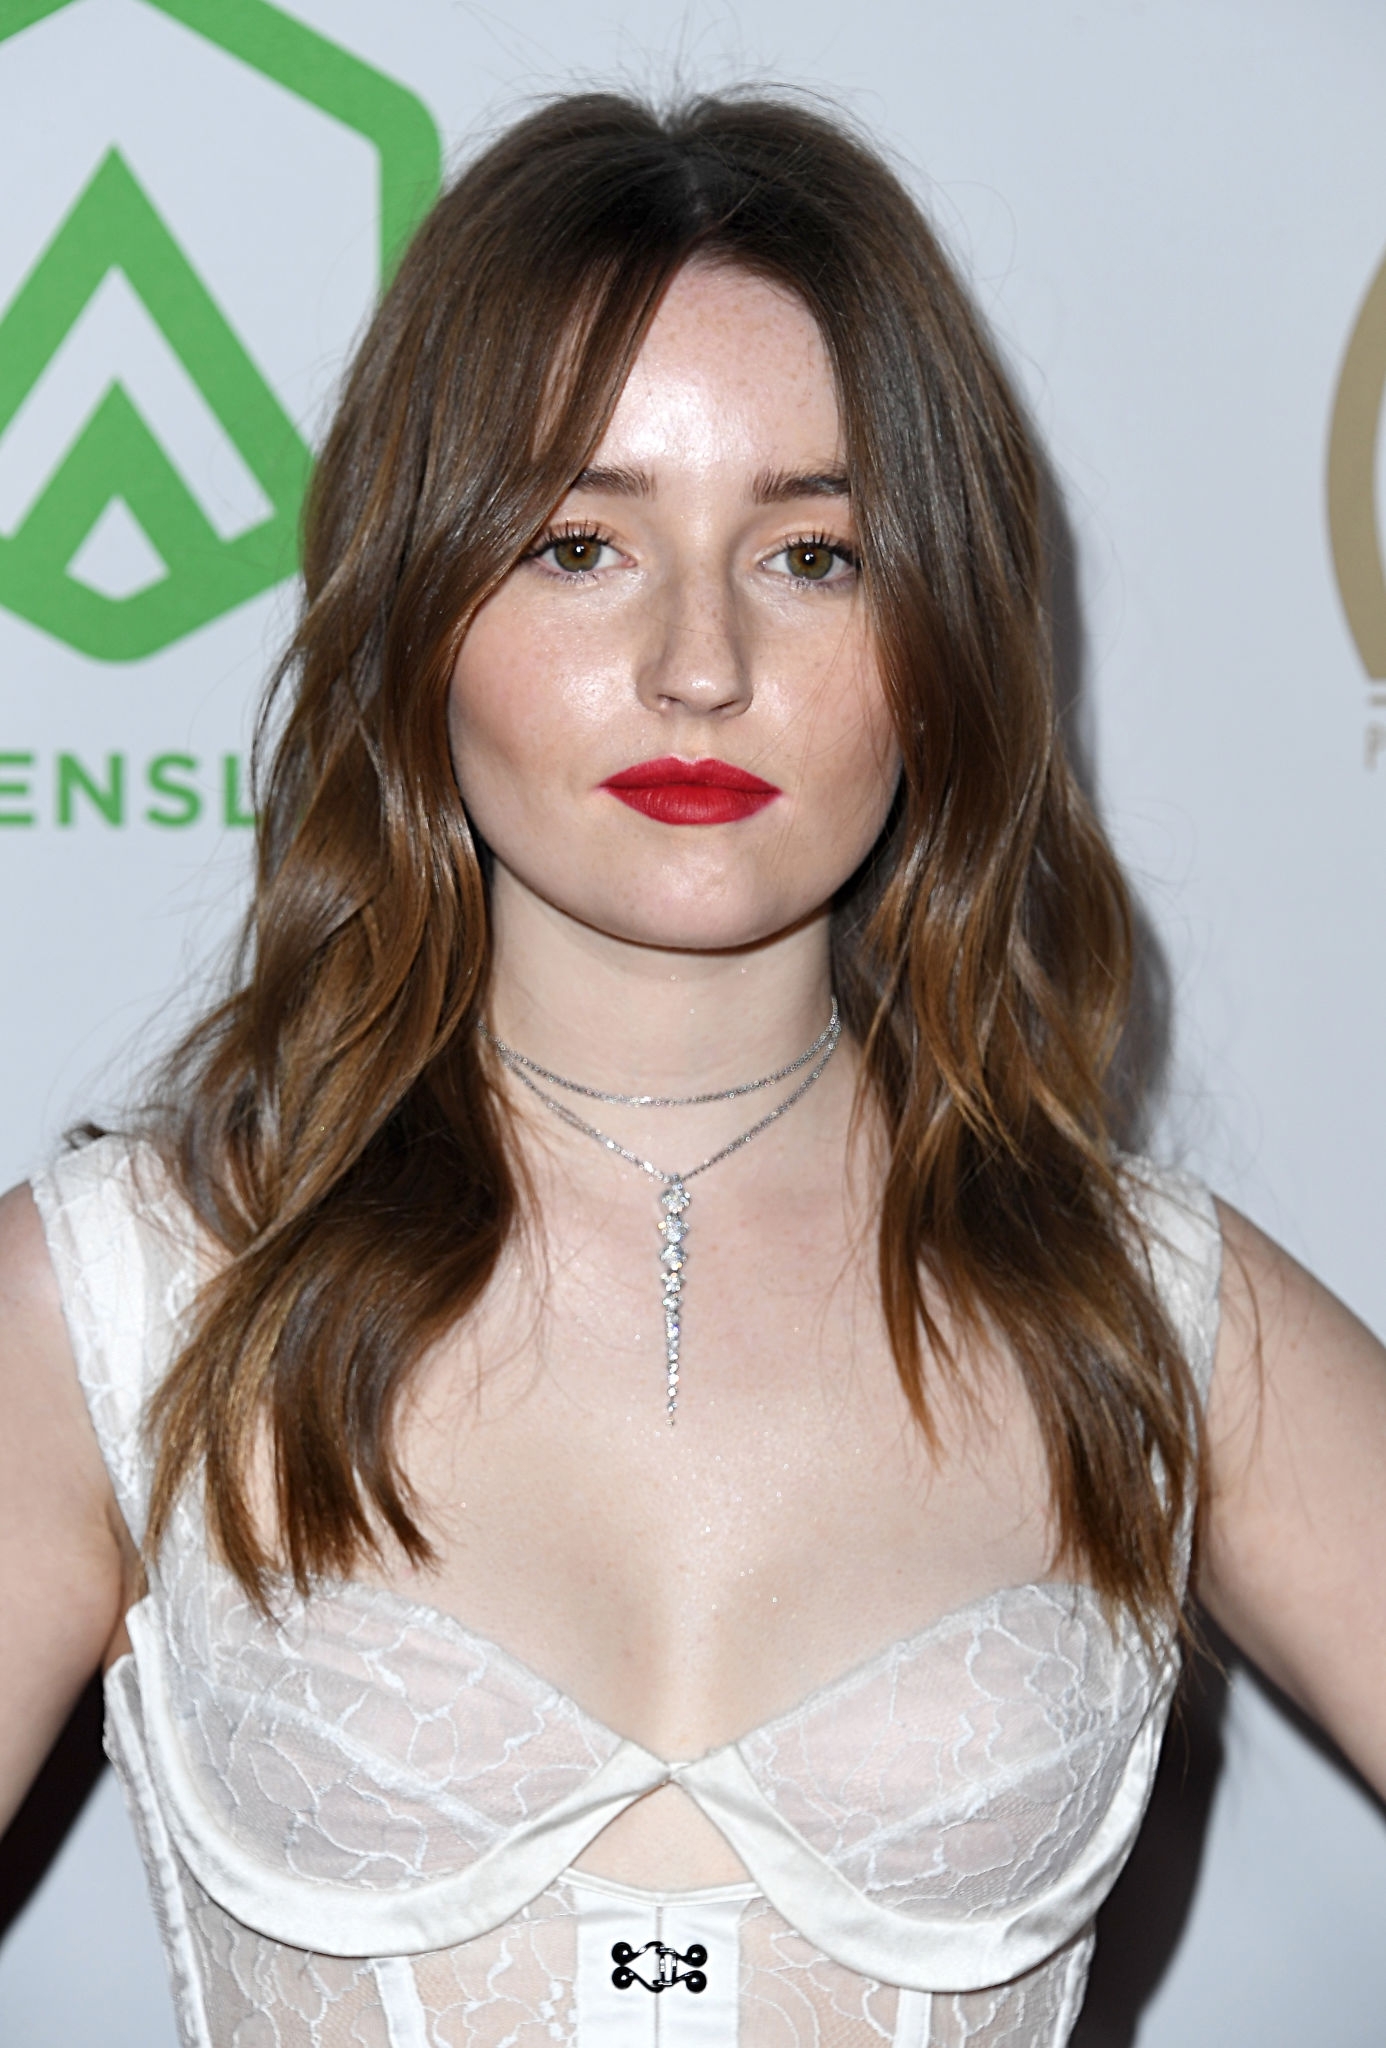 Pale-Skinned Beauty Kaitlyn Dever Shows Her Cleavage in a Sexy Outfit